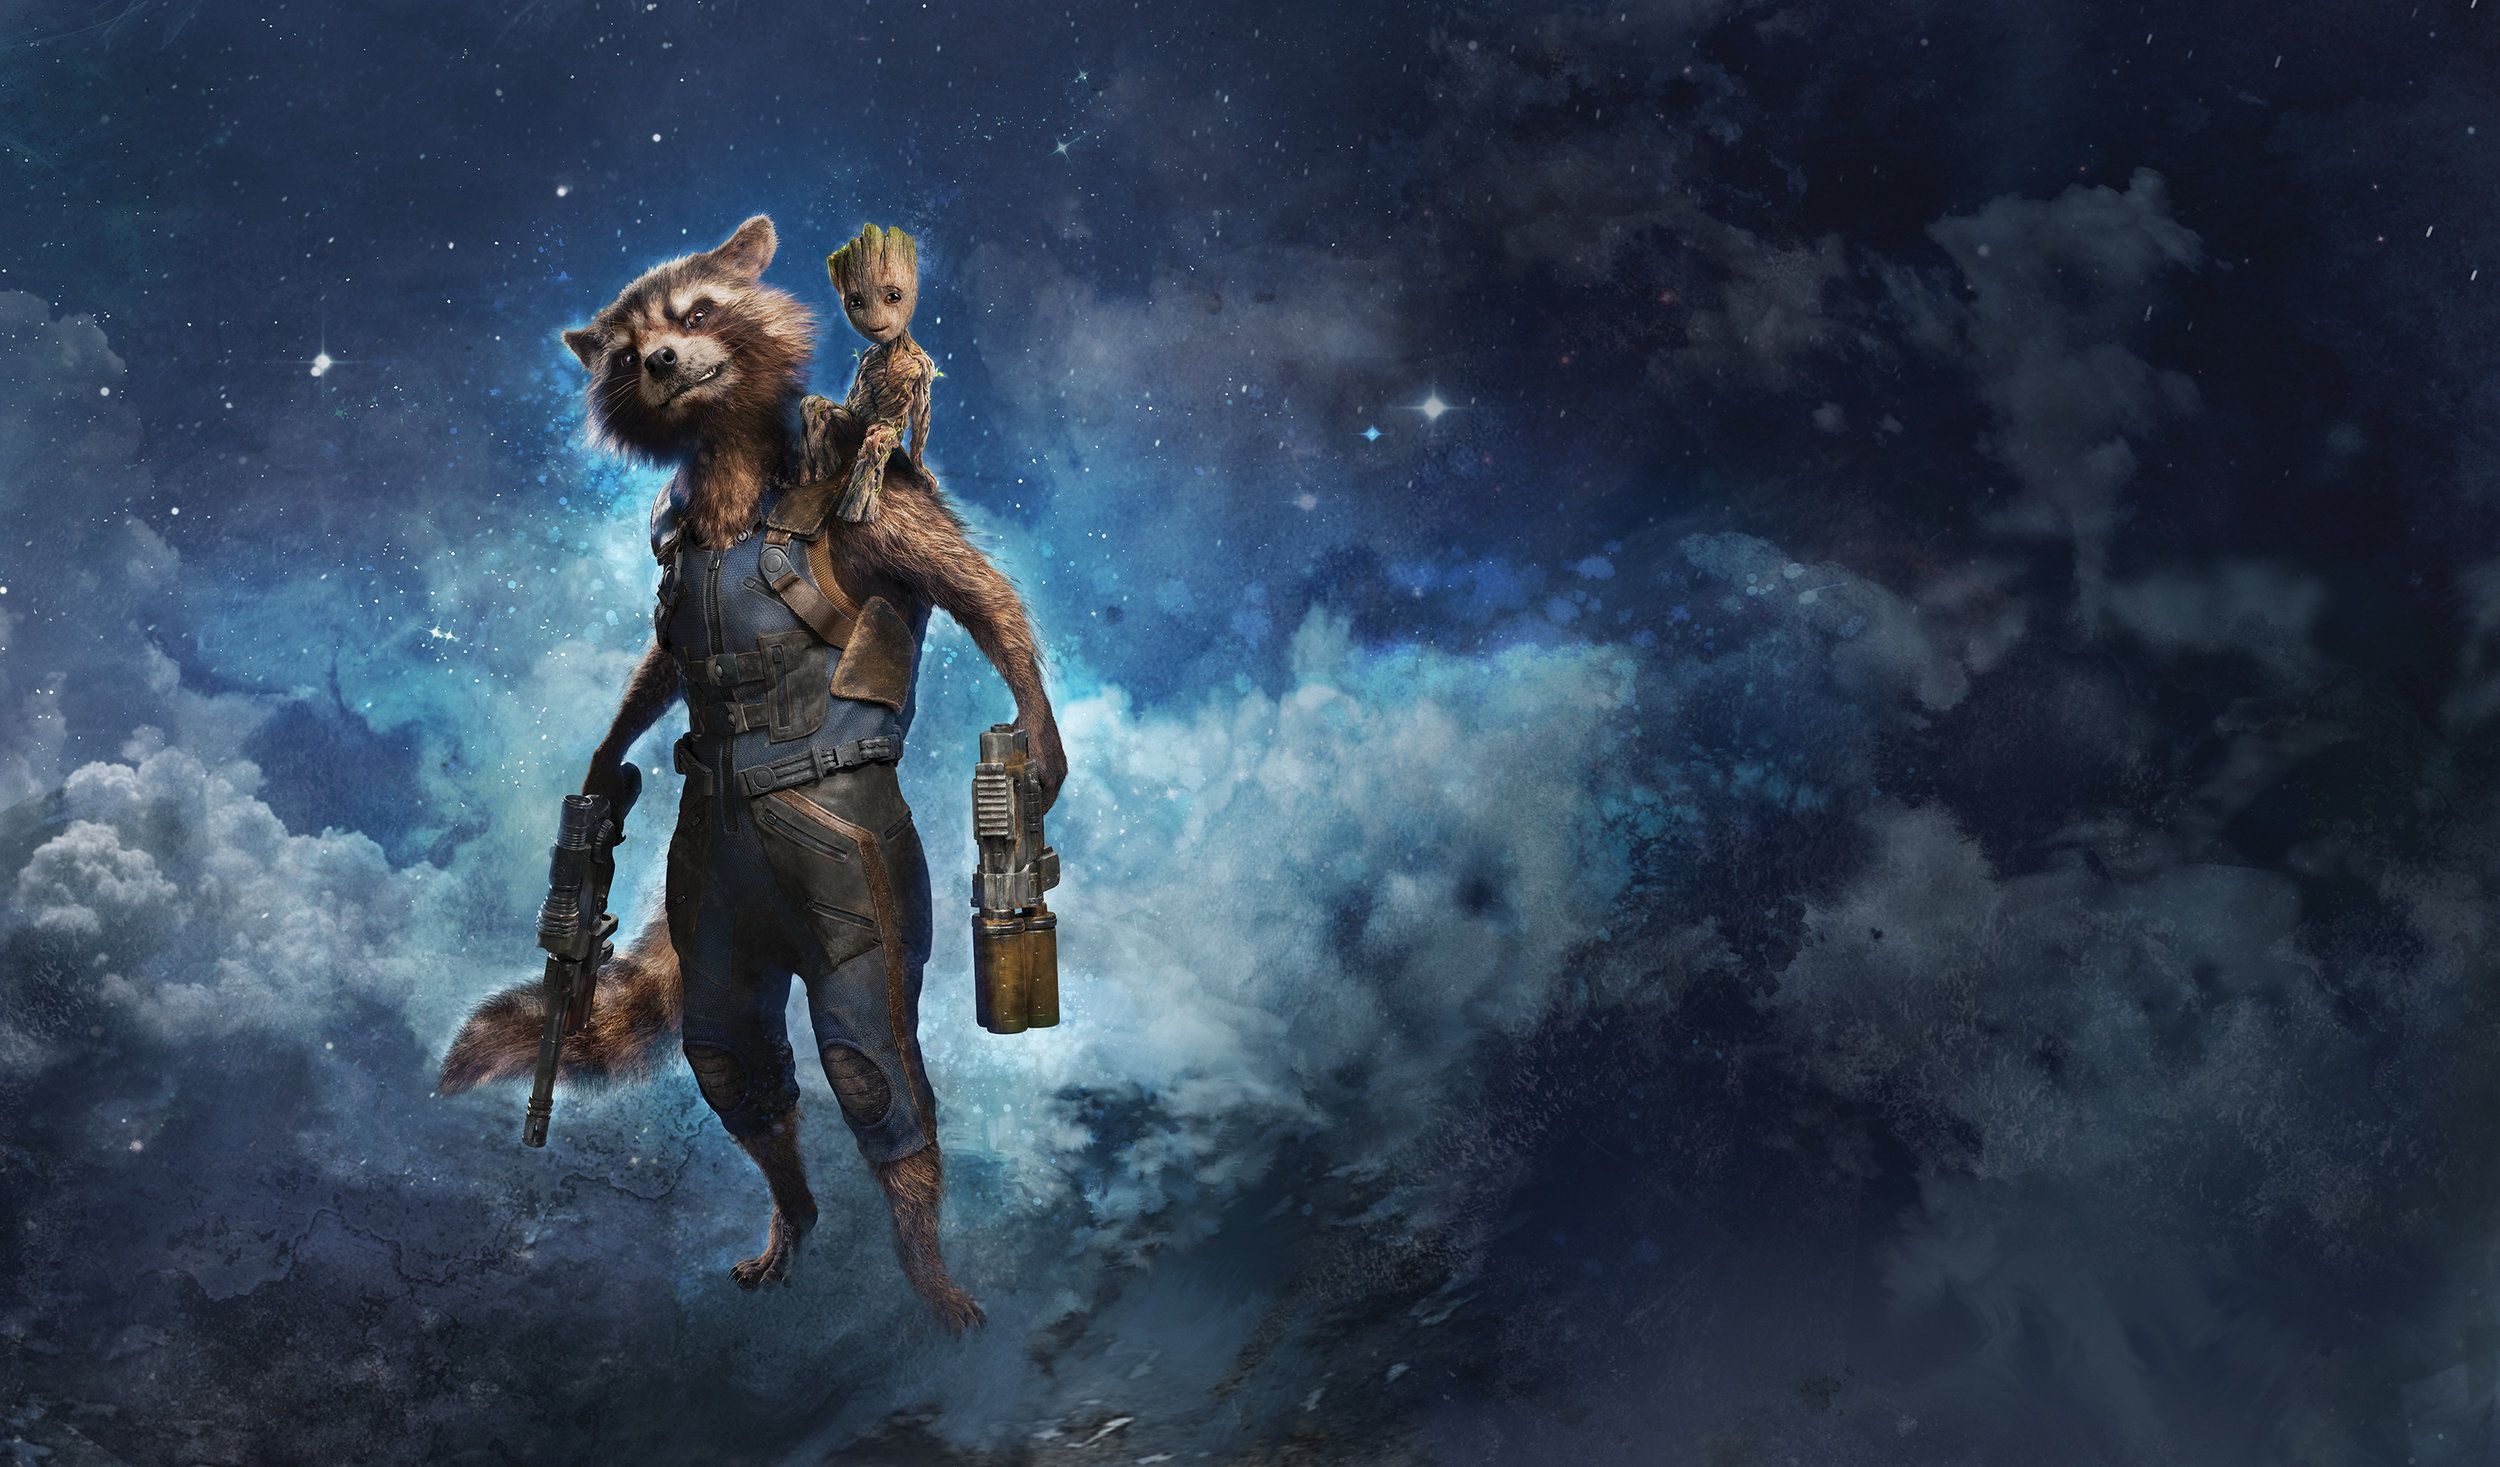 Rocket and Groot Wallpaper Free Rocket and Groot Background